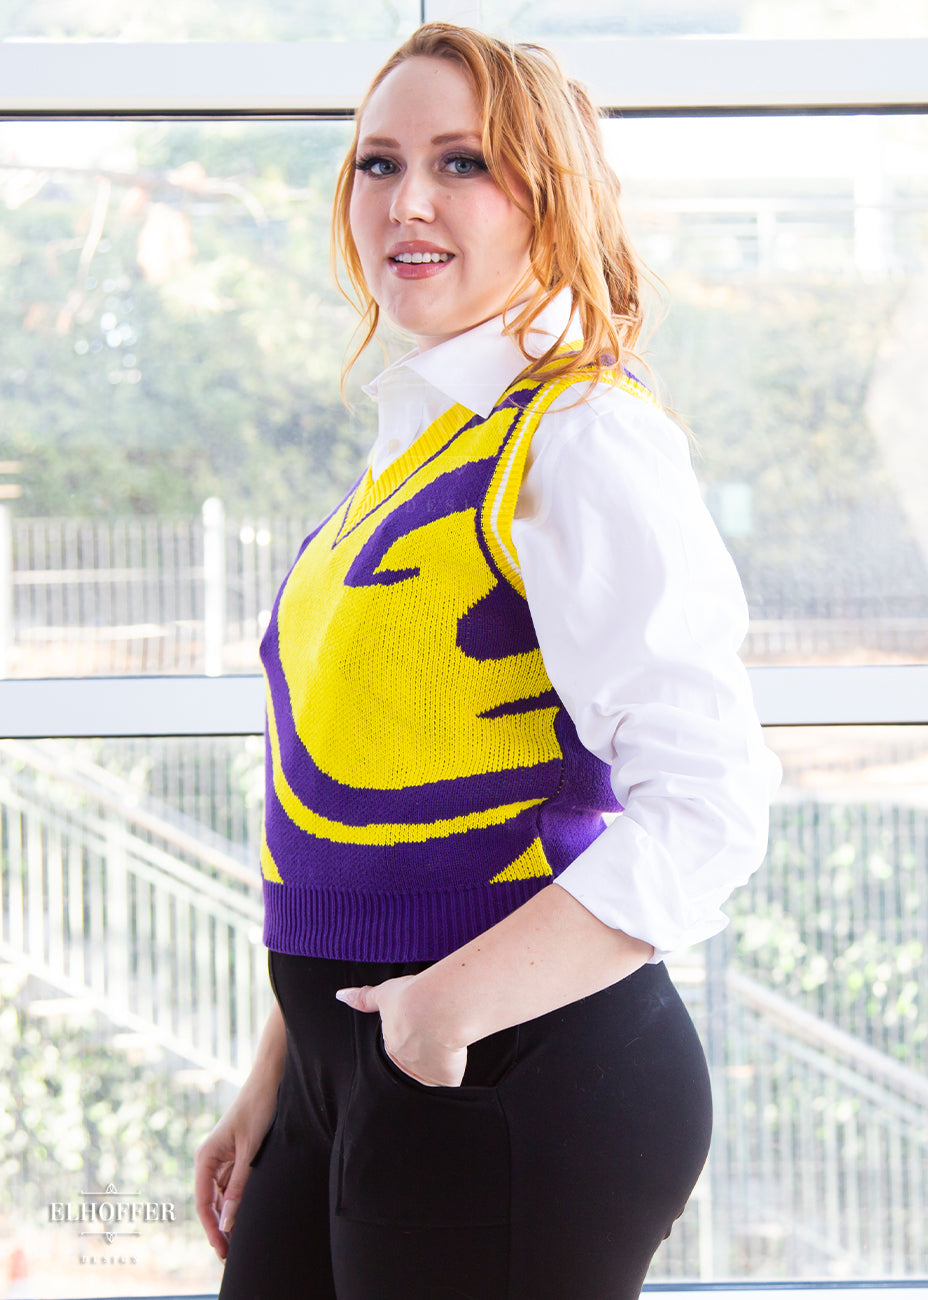 Kelsey, a size small fair skinned model with long ginger hair, is wearing a pullover vest with a boxy fit and v-neck. It is bright purple with a yellow swirl detail across the body.